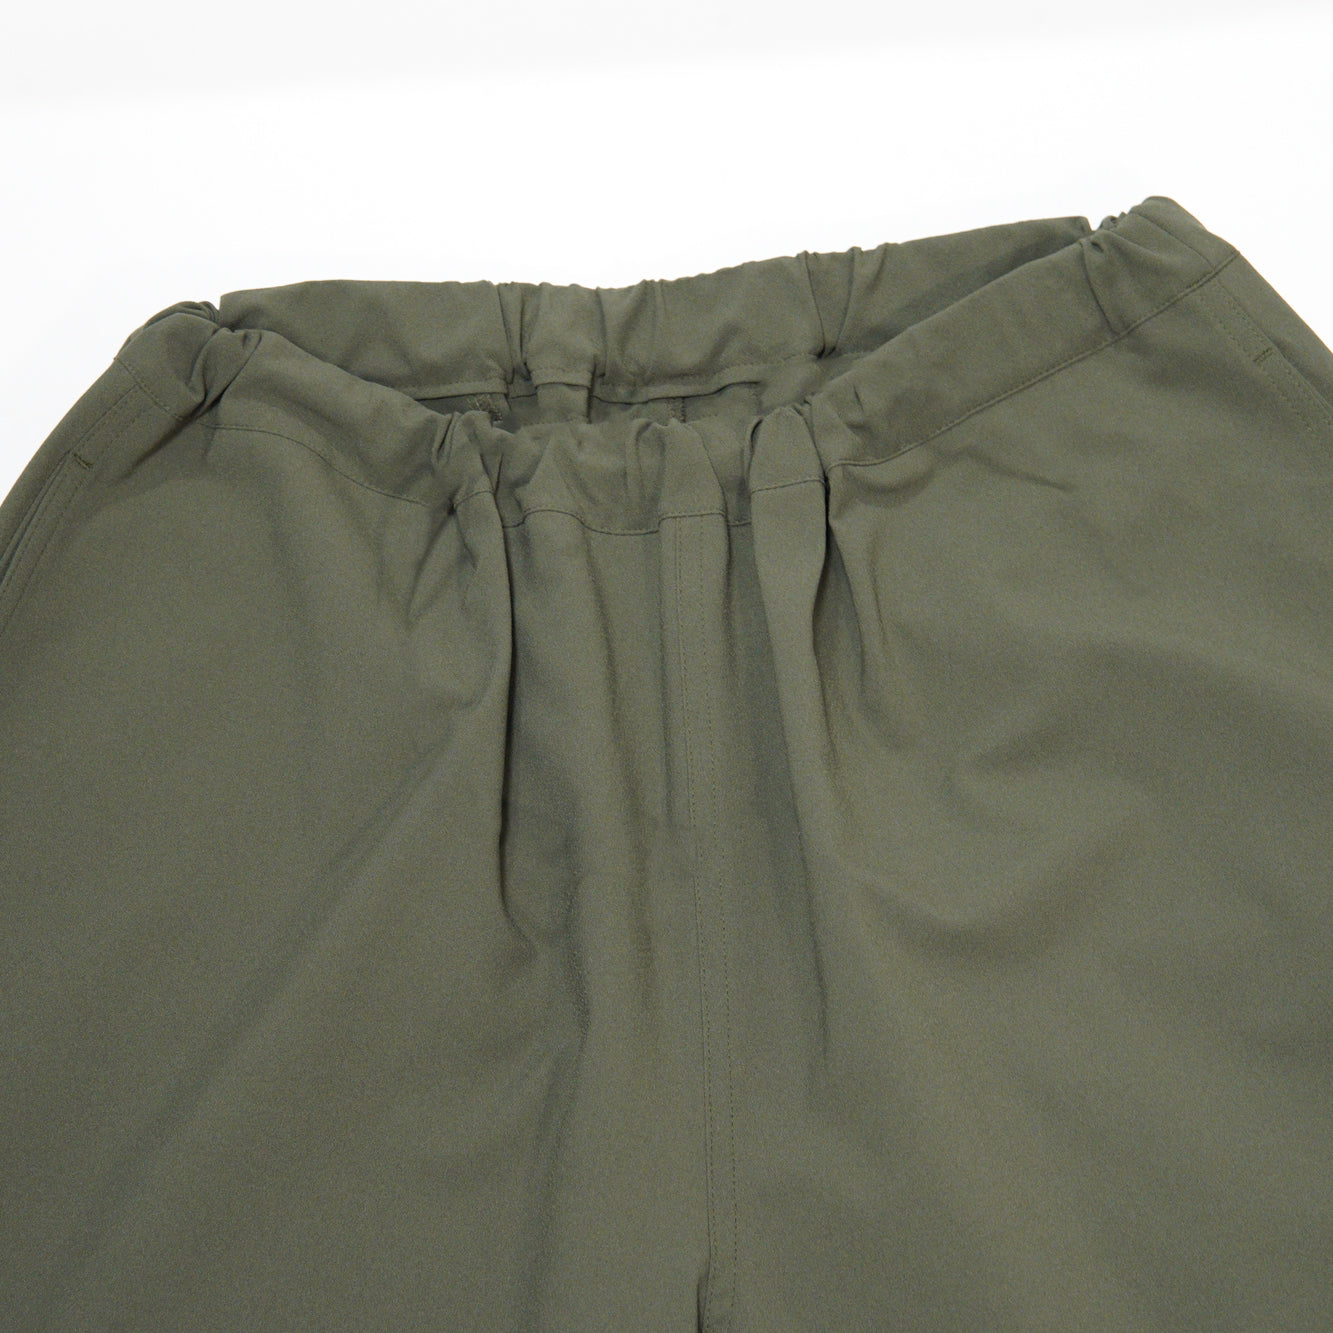 No:PH22FW-001 | Name:P.H. M.EASY PANTS | Color:Charcoal/Black/Blue/Olive【POWDERHORN MOUNTAINEERING】